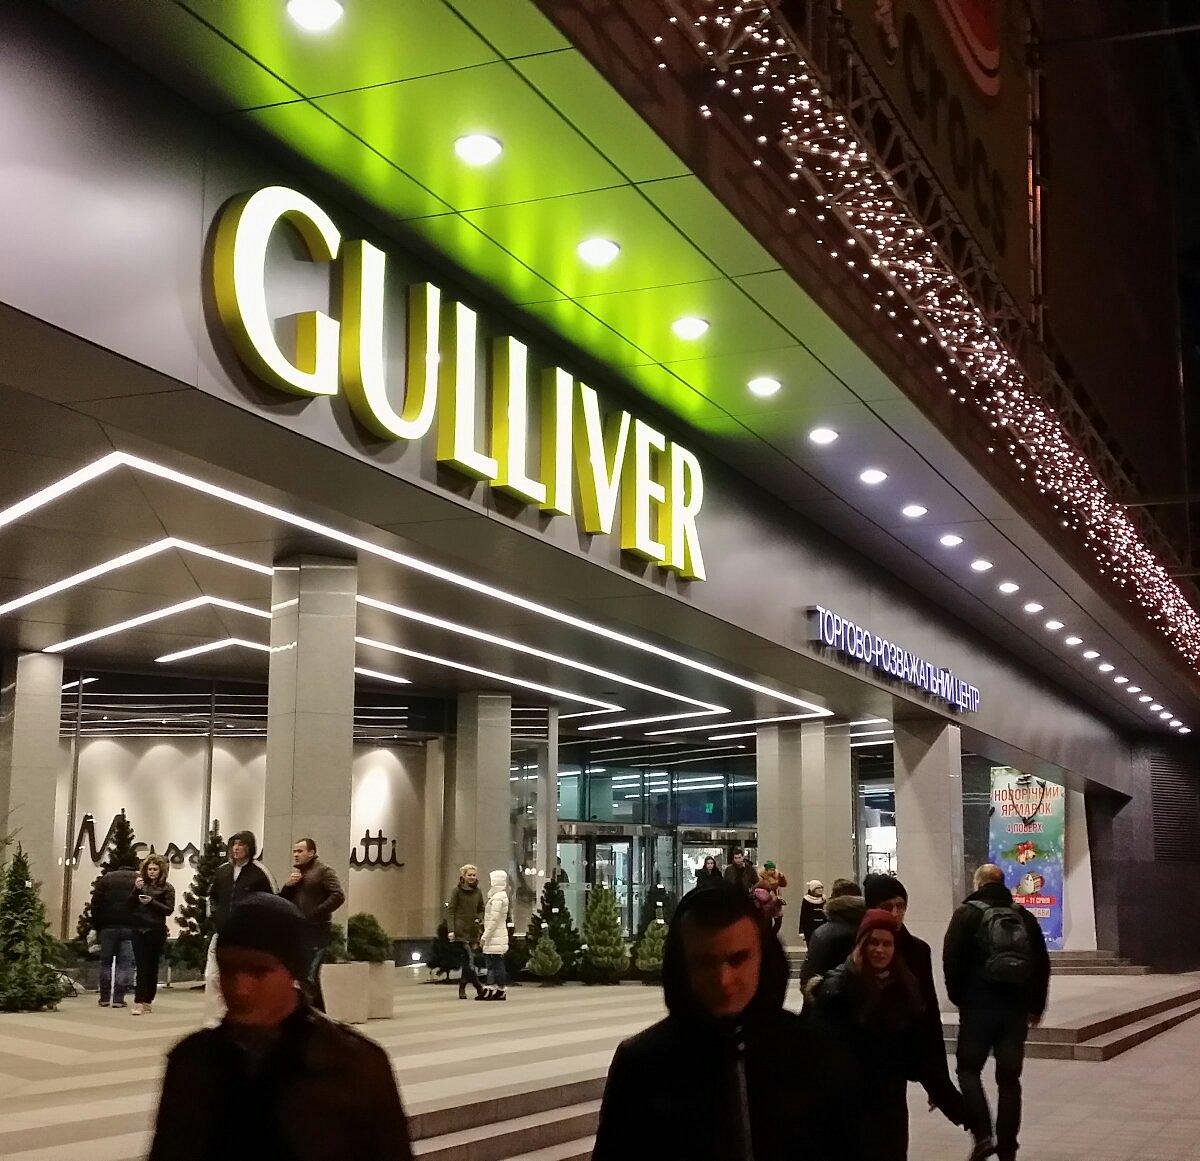 GULLIVER SHOPPING MALL - All You Need to Know BEFORE You Go (with Photos)